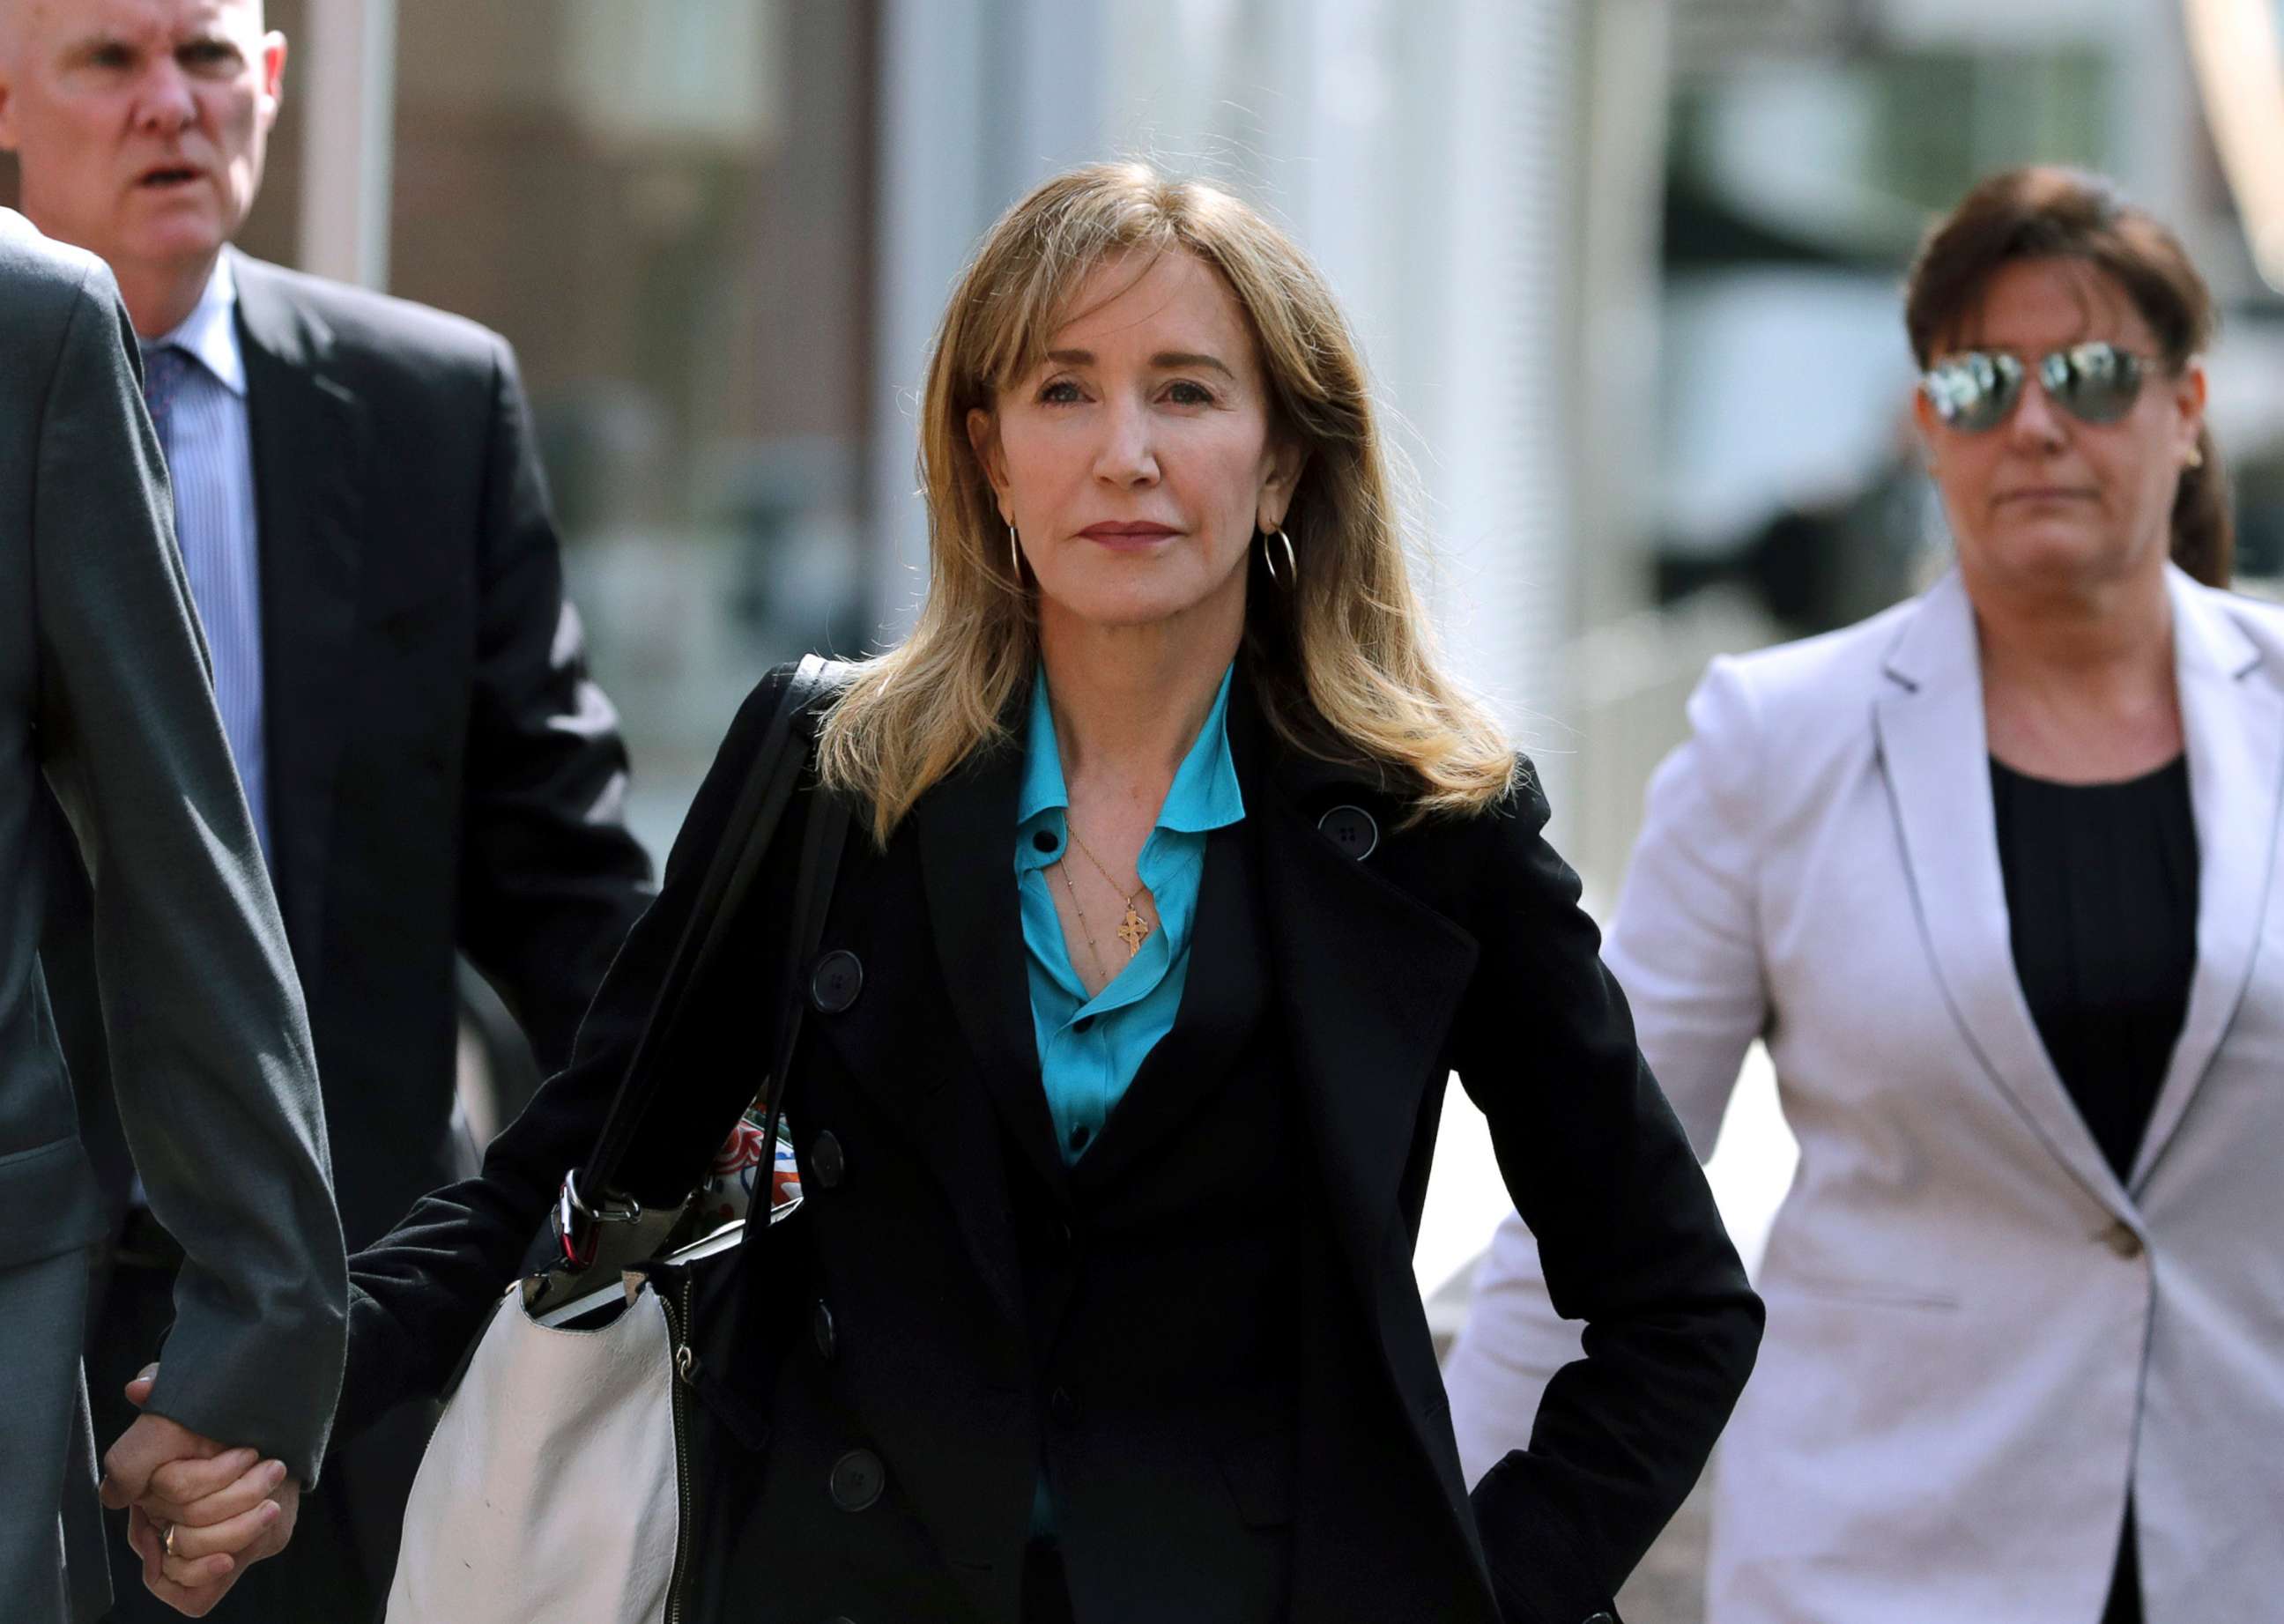 PHOTO: Actress Felicity Huffman arrives at federal court in Boston, April 3, 2019, to face charges in a nationwide college admissions bribery scandal.